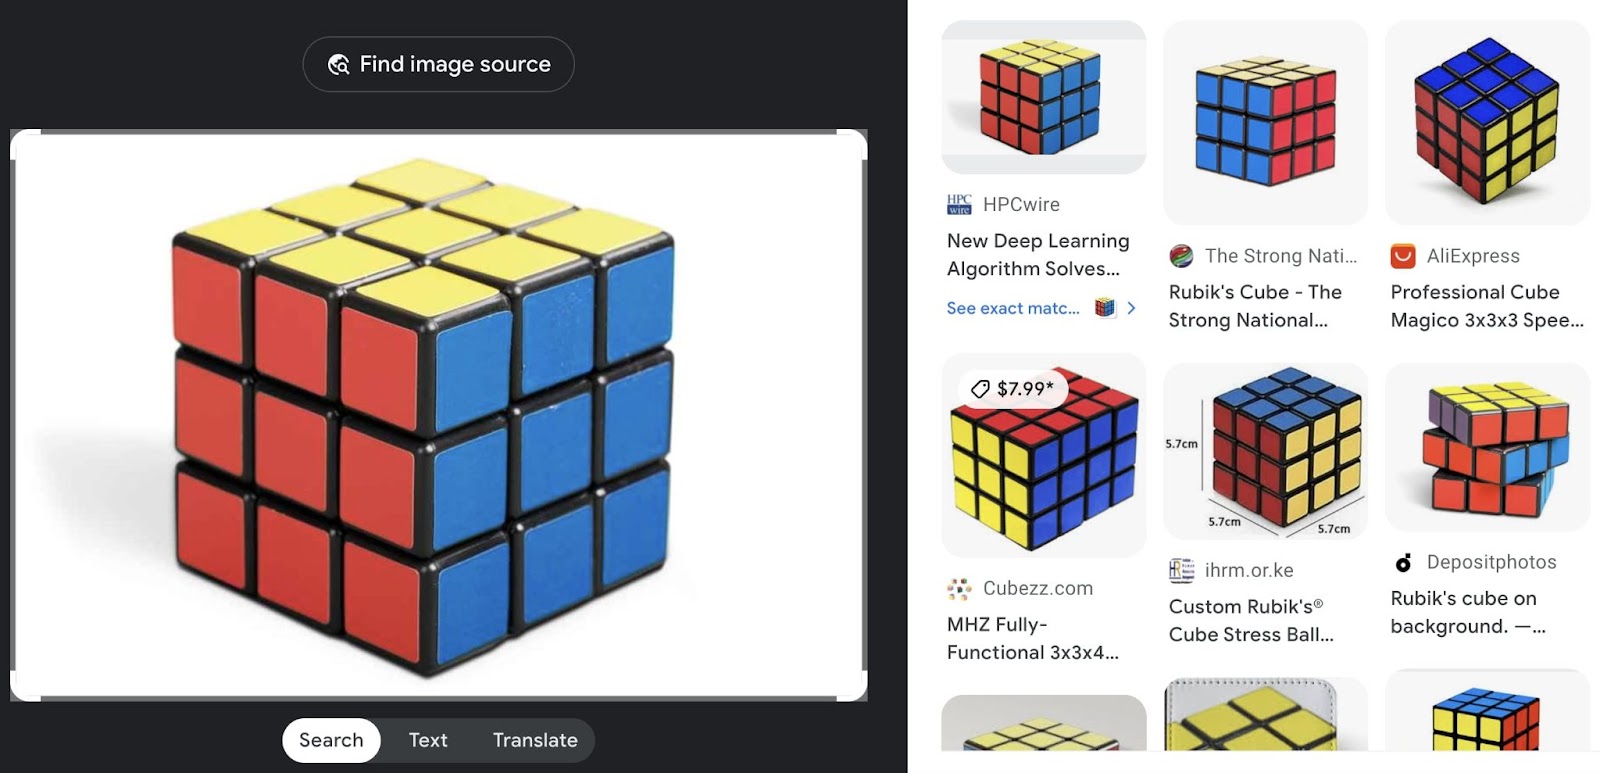 Reverse image search of a Rubik's cube using Google with accompanying results